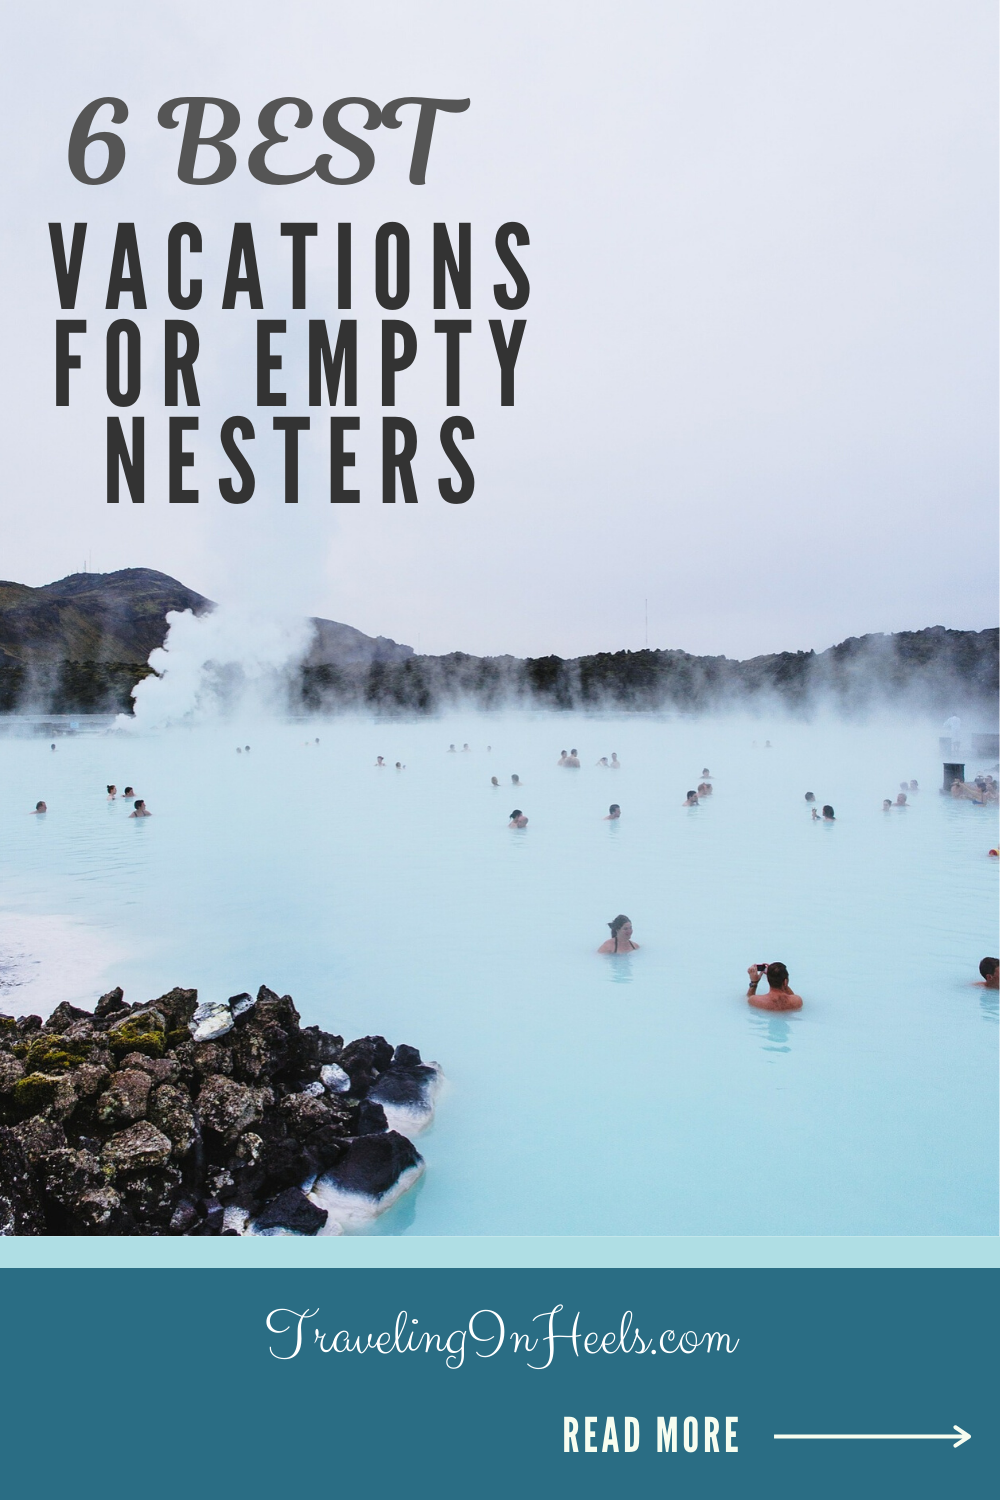 From Iceland to Florida, 6 best vacations for empty nesters #emptynestersvacations #travelbucketlist #romanticvacations